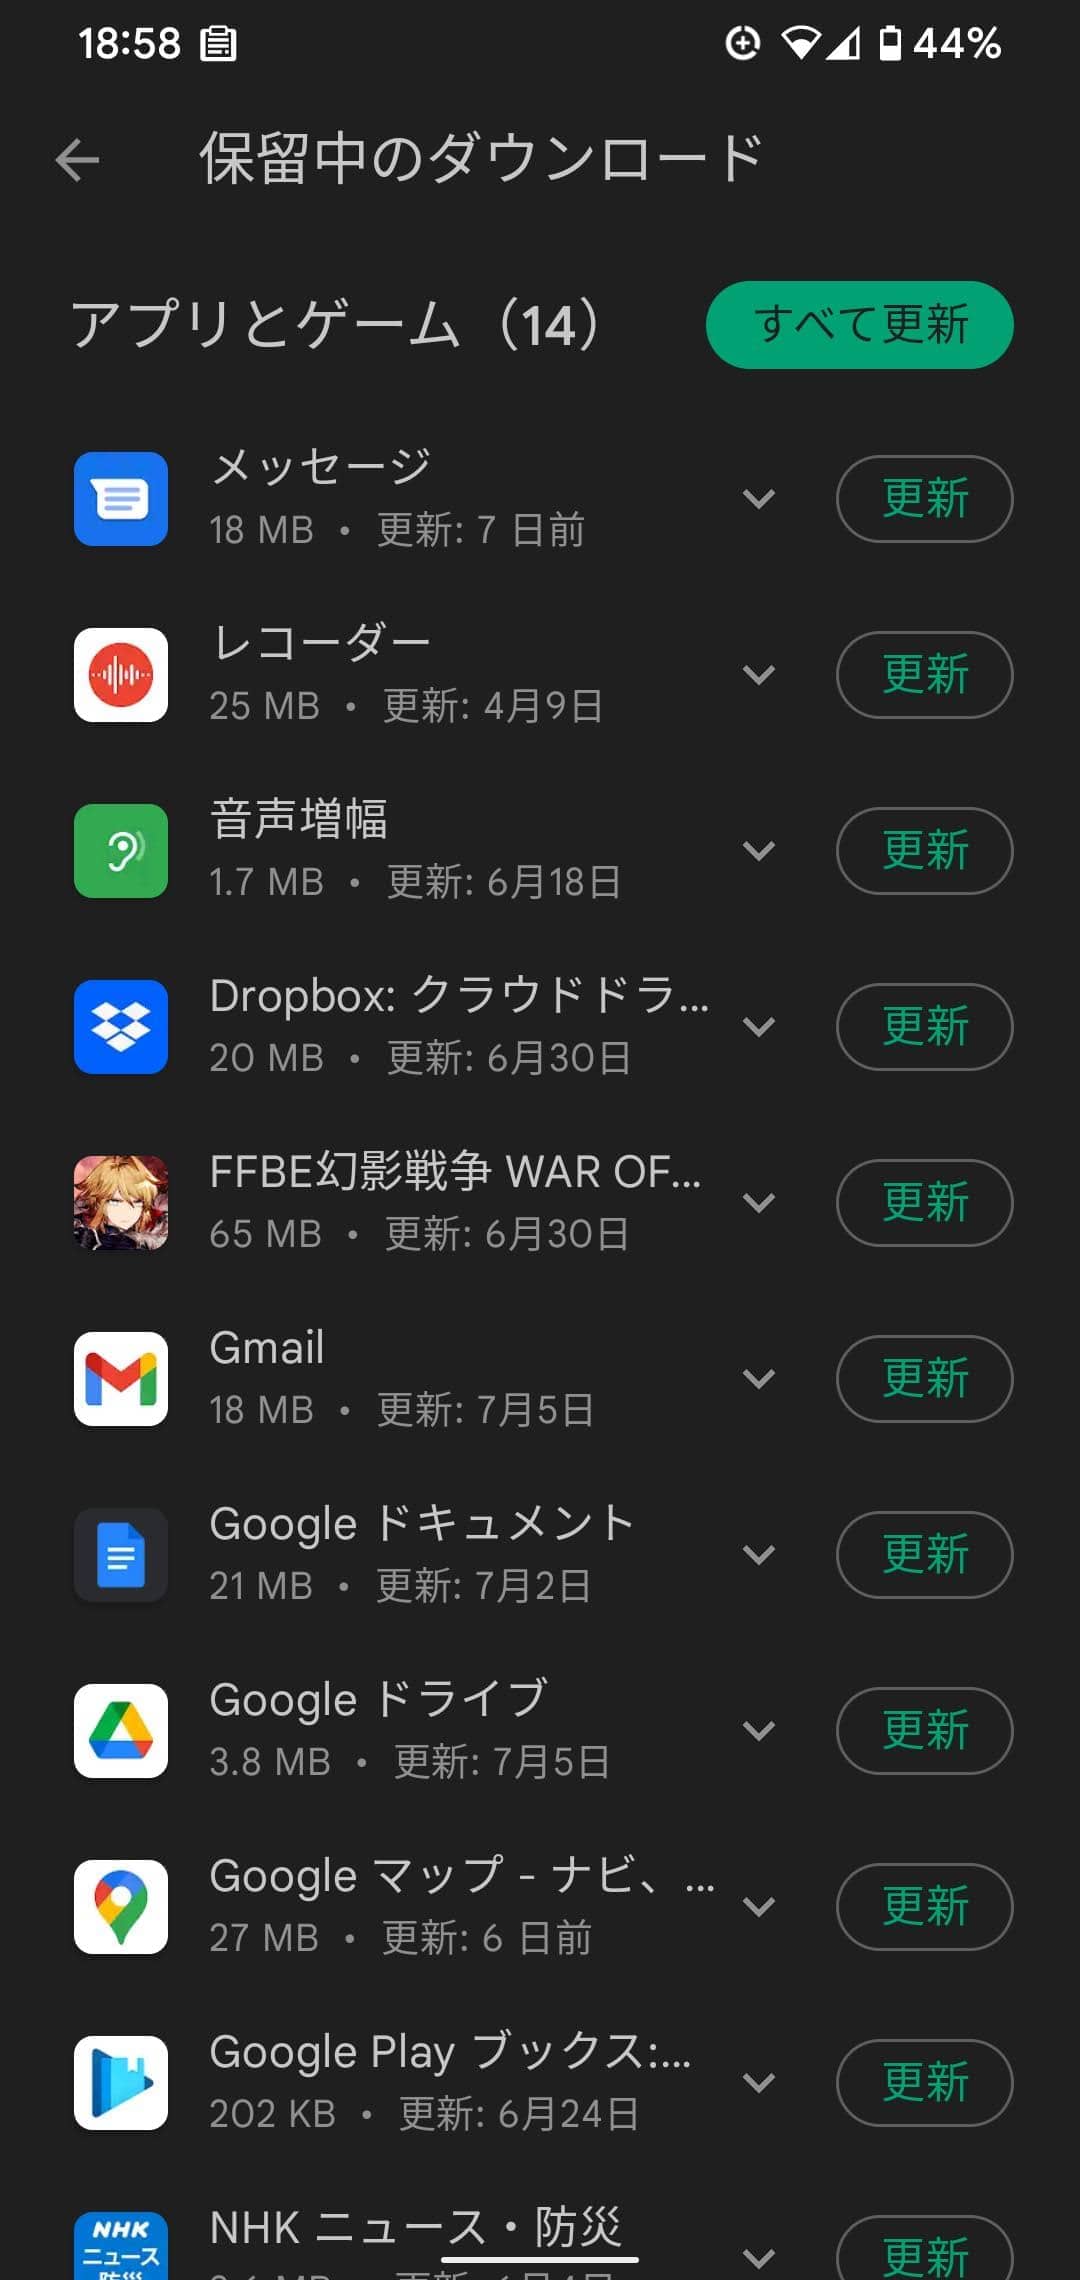 Android の アプリ と Playストア をアップデート（更新）する方法